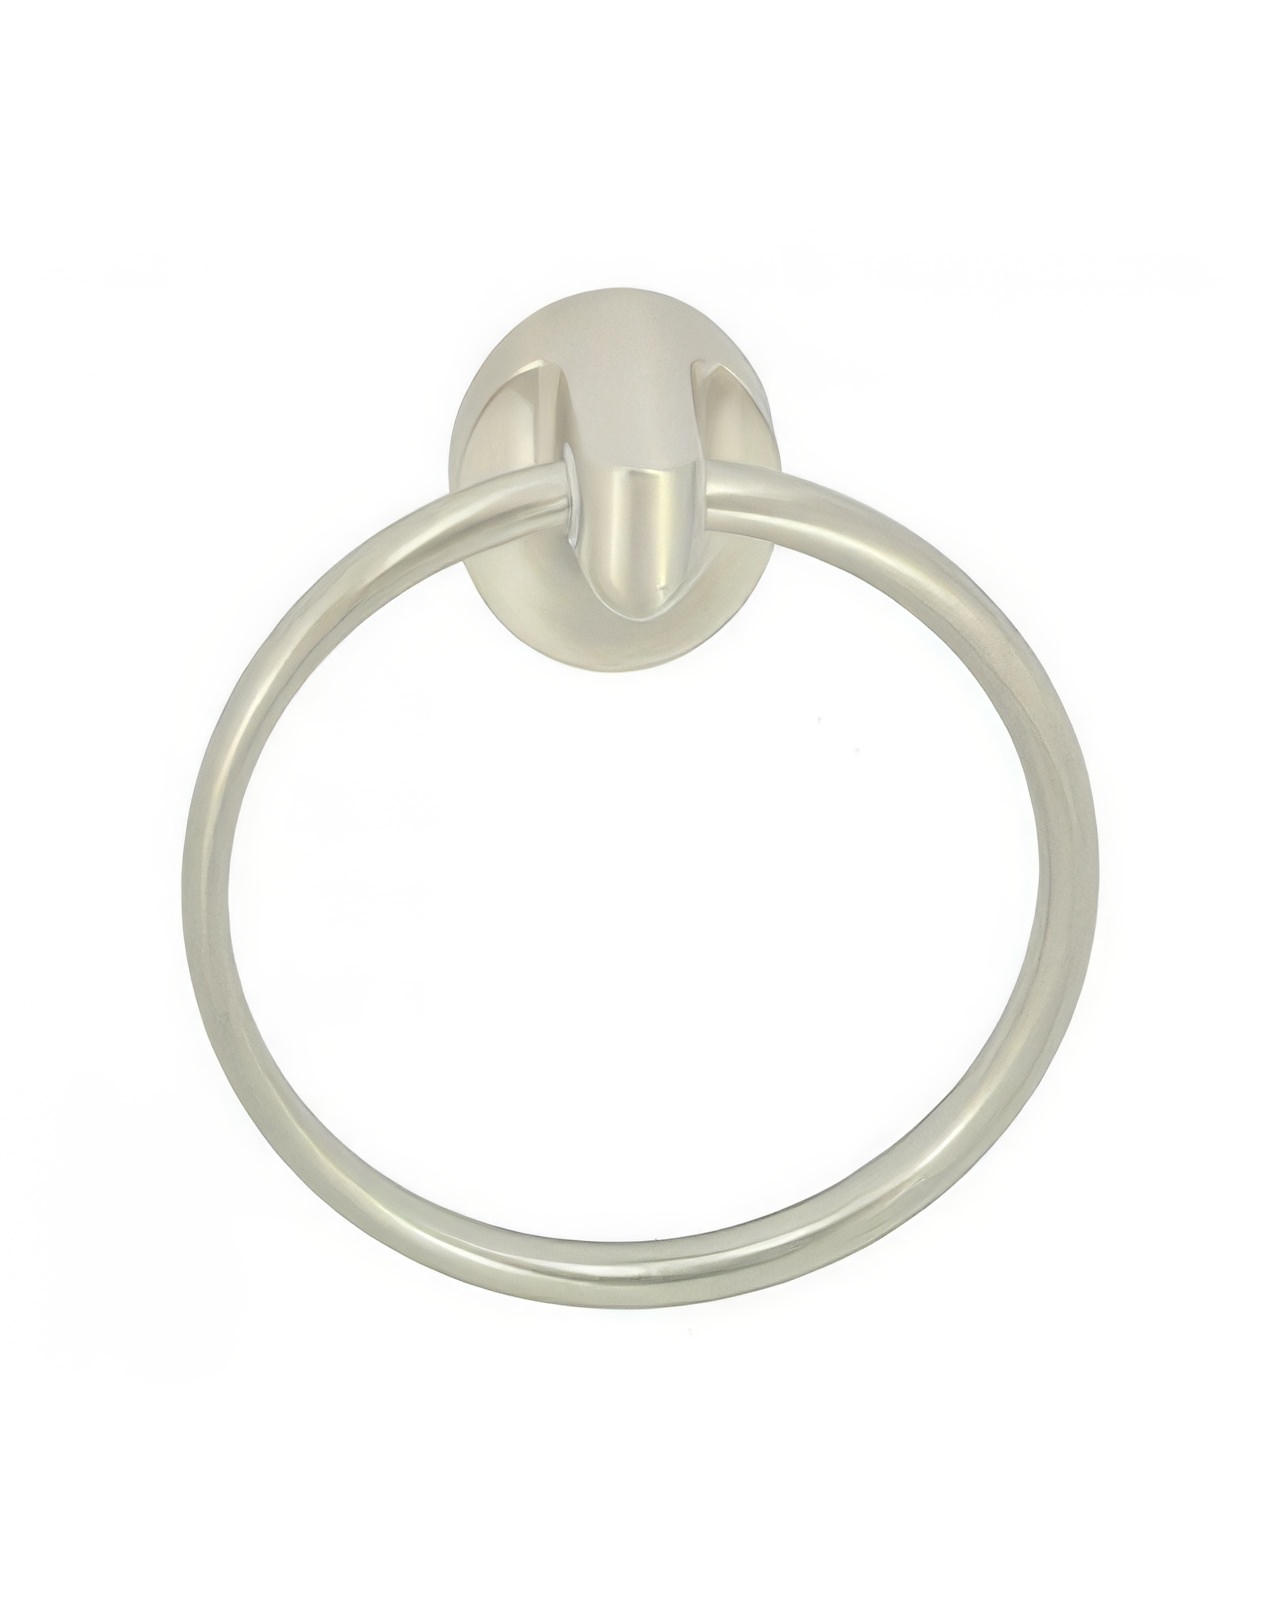 Better Home Products Soma Towel Ring